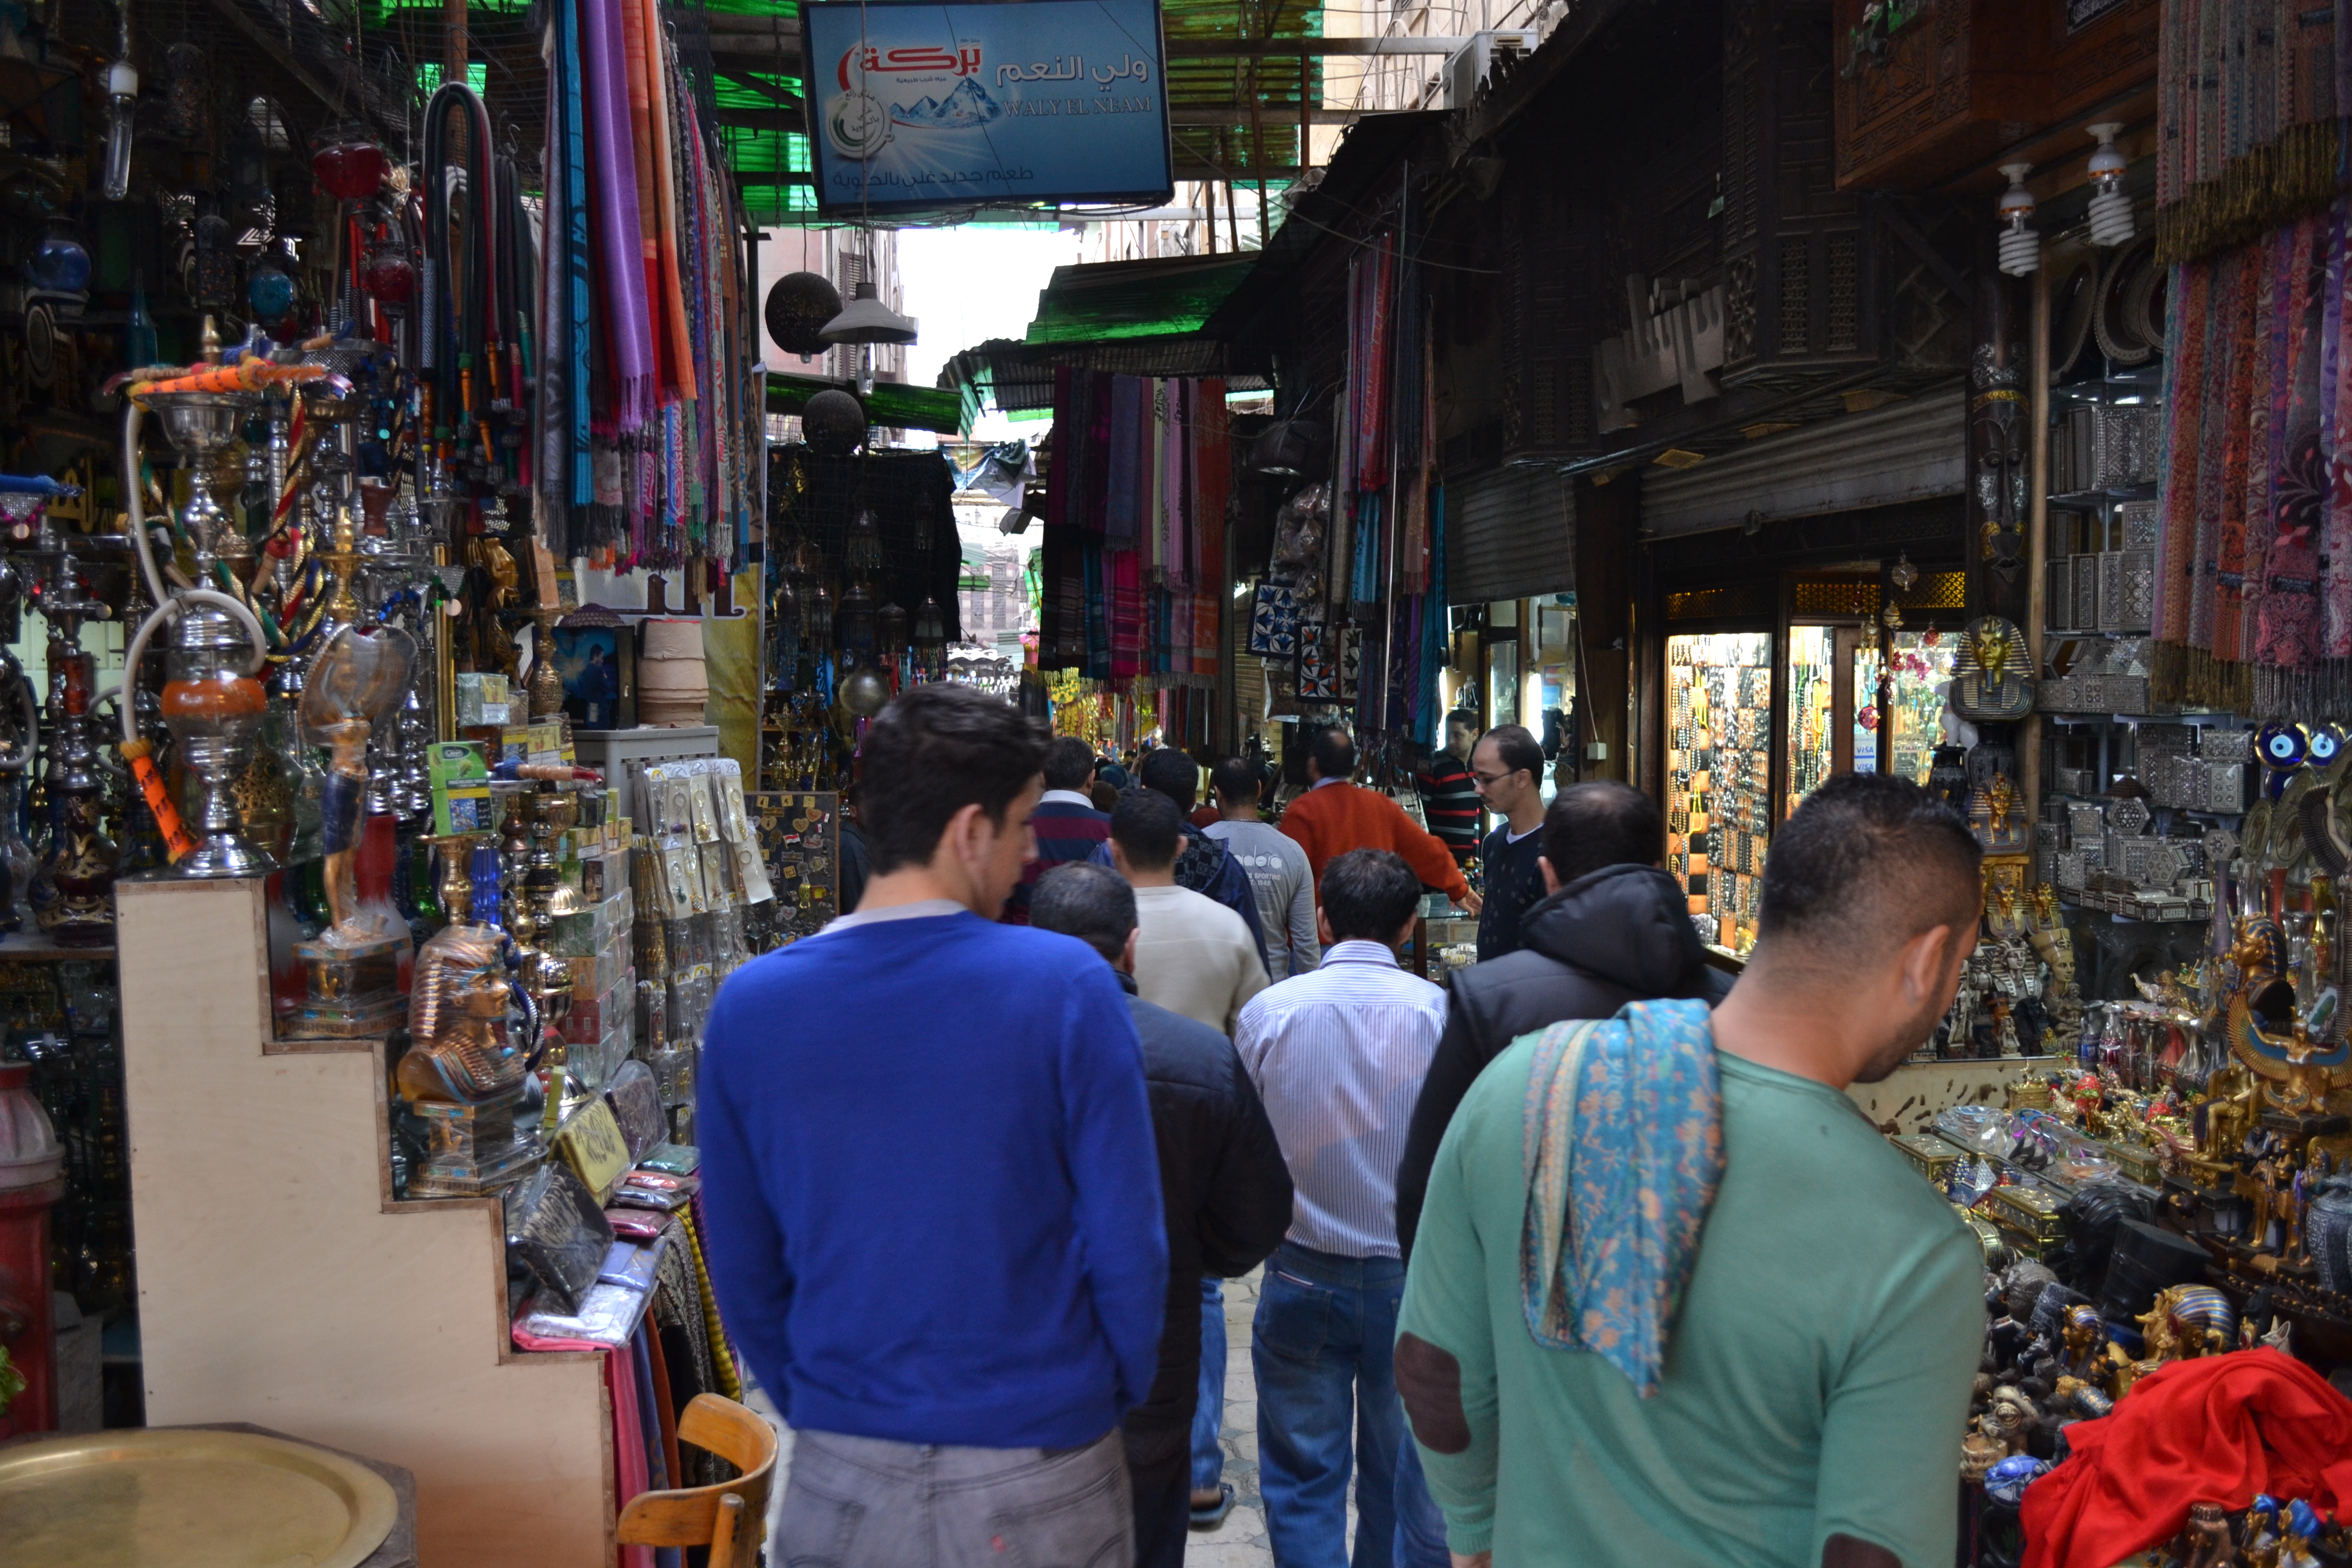 This was a relatively quiet day. At busier times, the alleys are filled with hundreds of people.